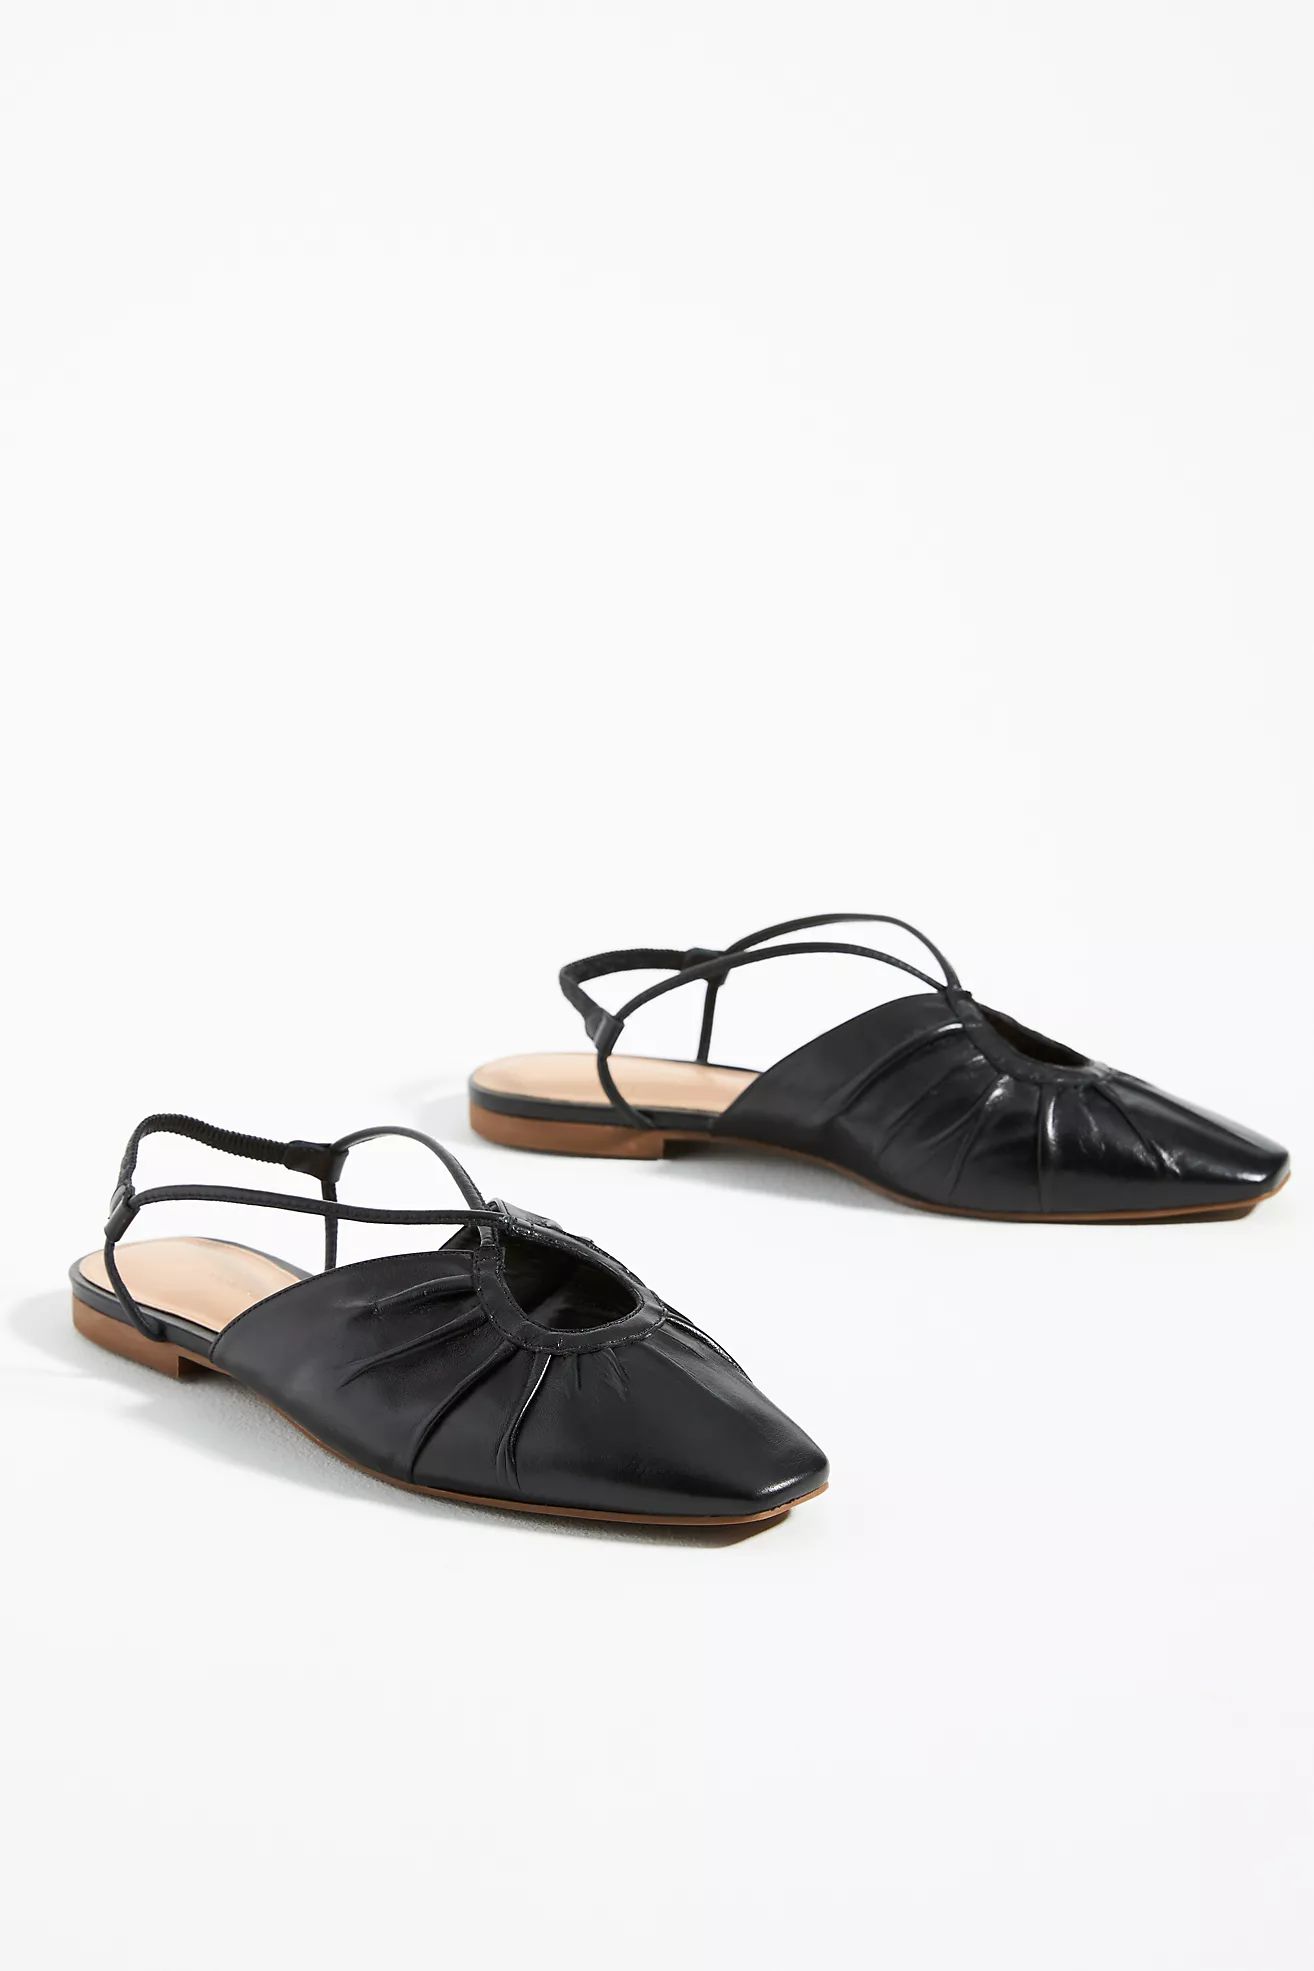 Maeve Strappy Flats | Anthropologie (US)